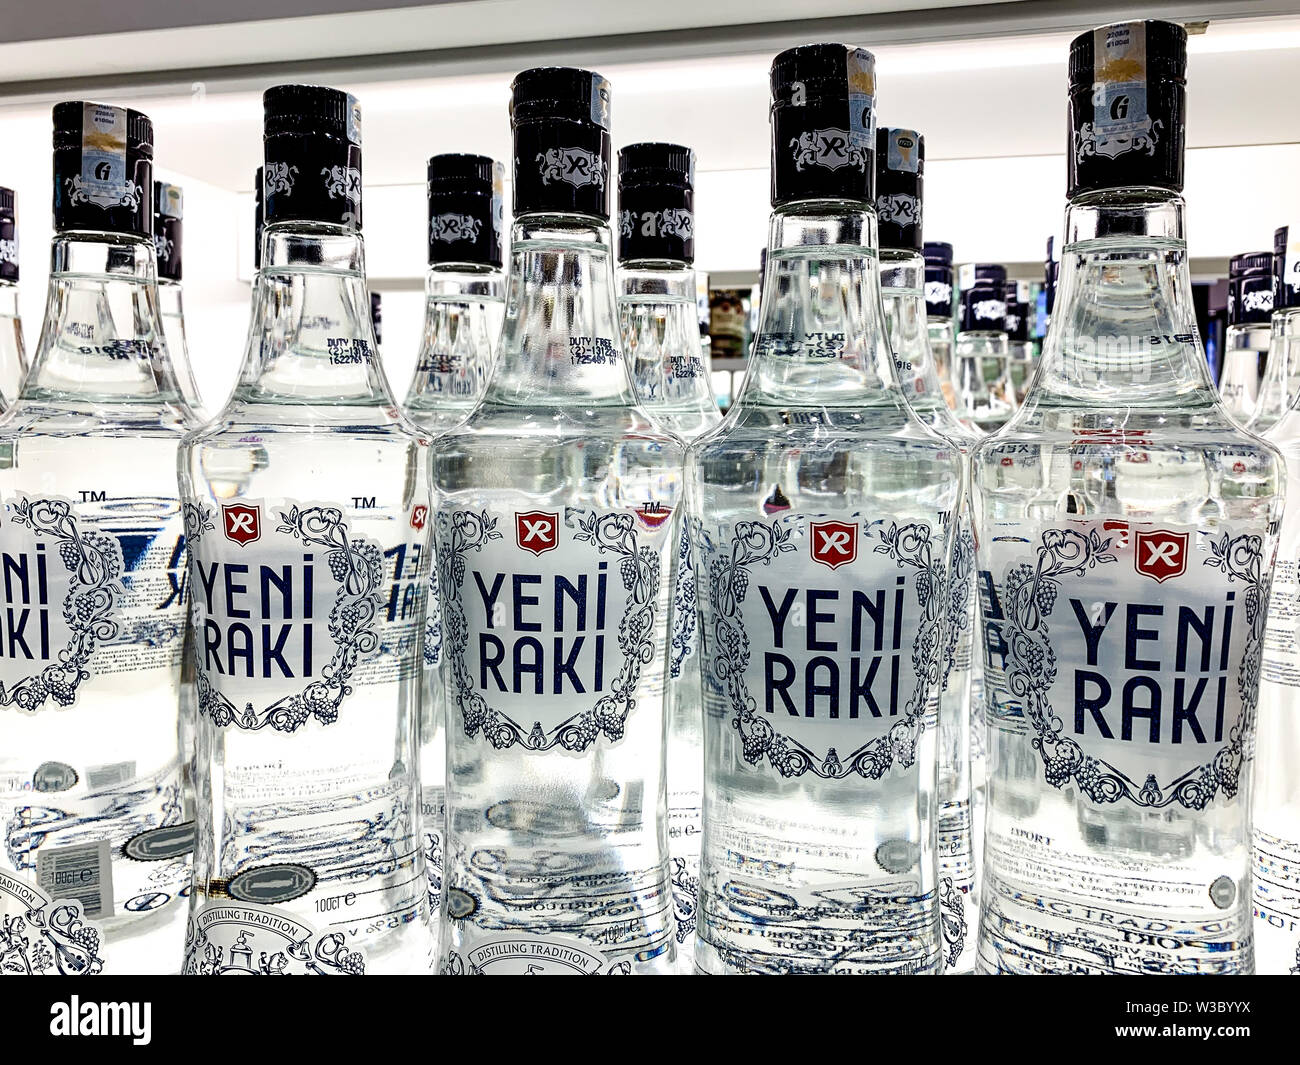 Yeni Raki is a sweetened, often anise-flavoured, alcoholic drink that is popular in Albania, Turkic countries, Turkey and in the Balkan countries as a Stock Photo